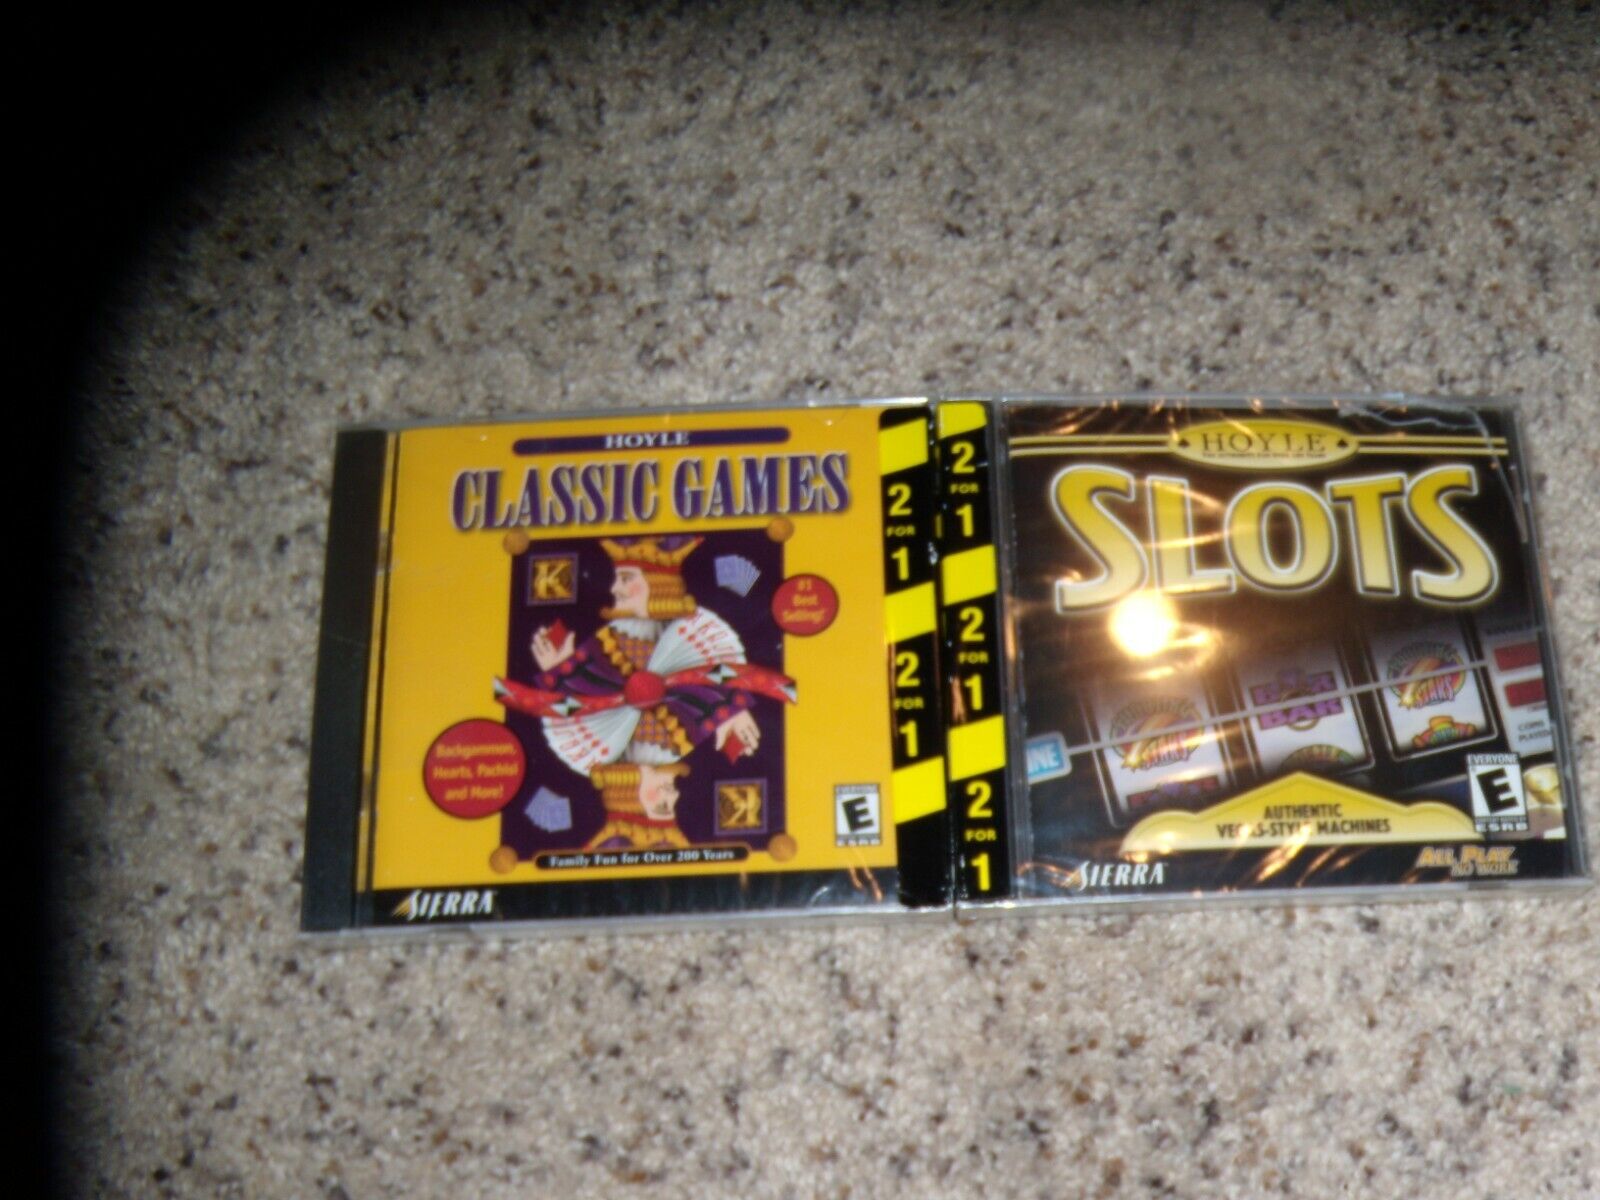 Hoyle Slot and Classic Games New and Sealed in jewel case